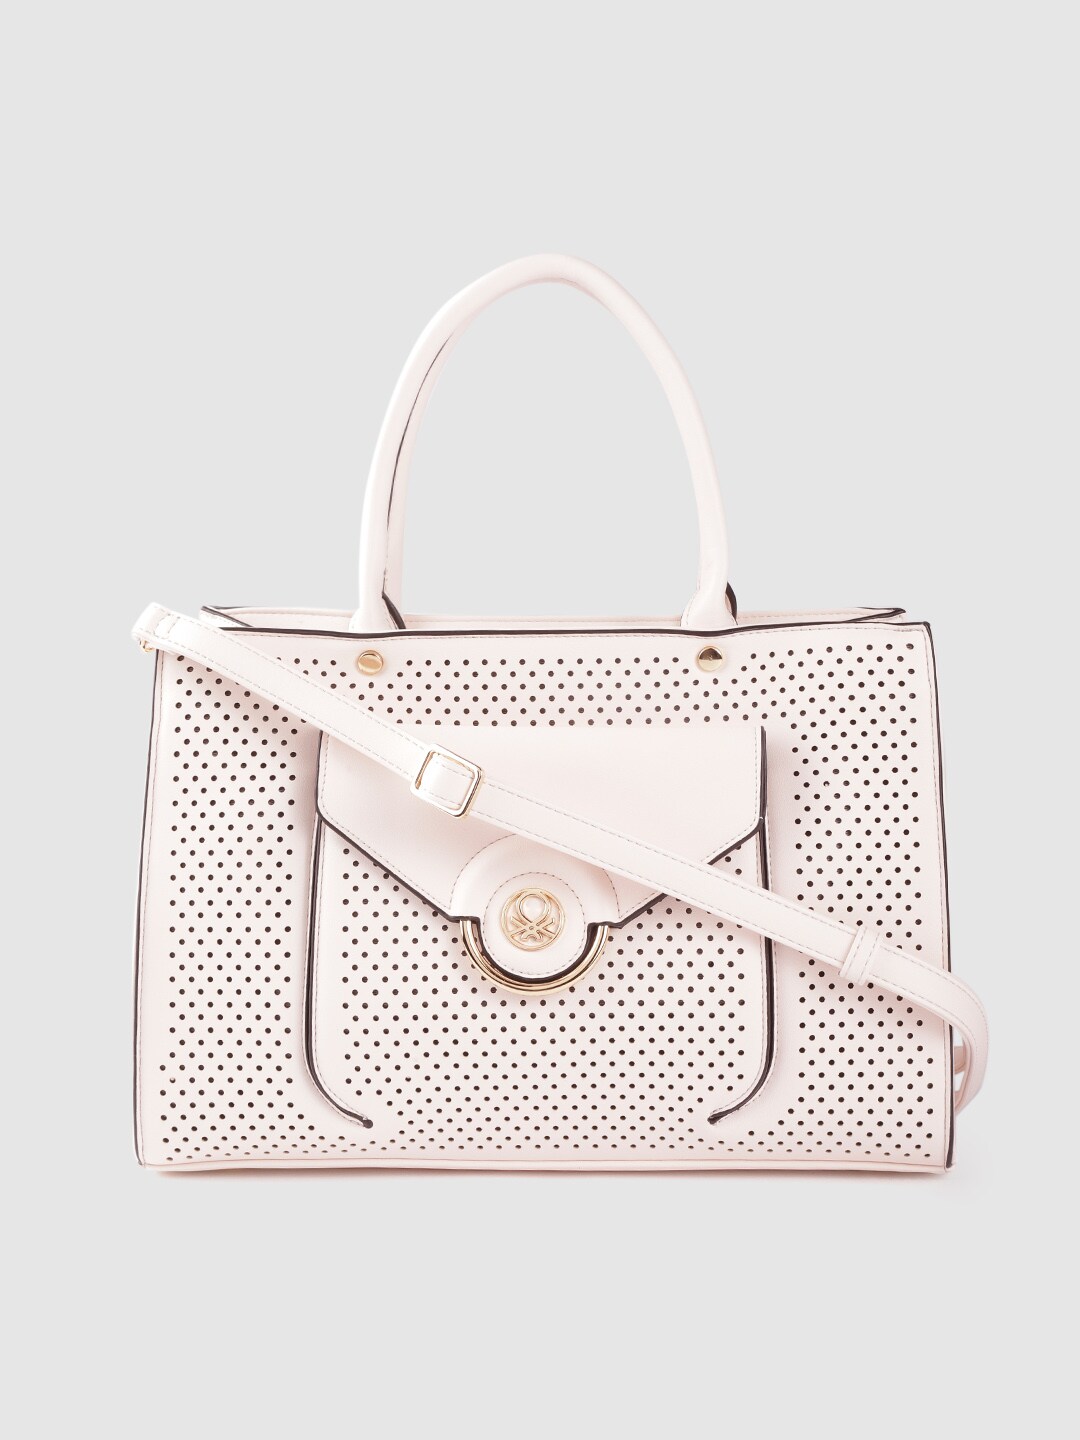 United Colors of Benetton Light Pink Laser Cut Structured Handheld Bag Price in India